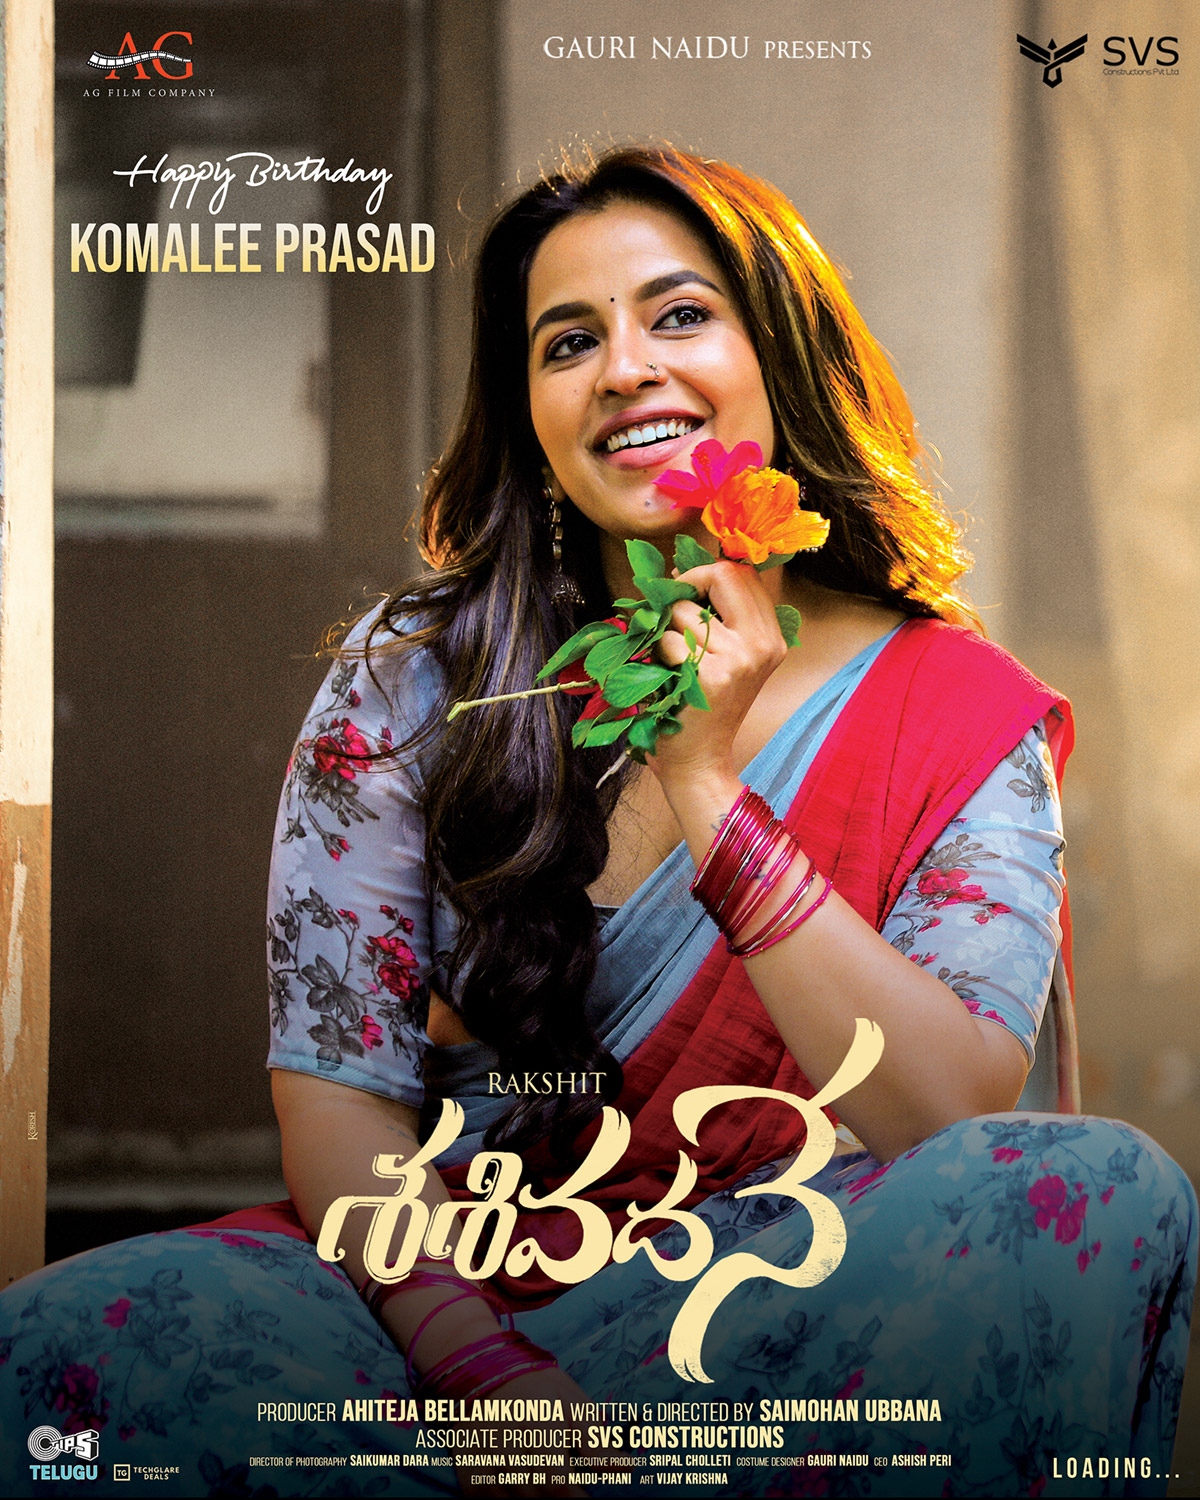 First Look poster of Komalee Prasad from Sasivadane released